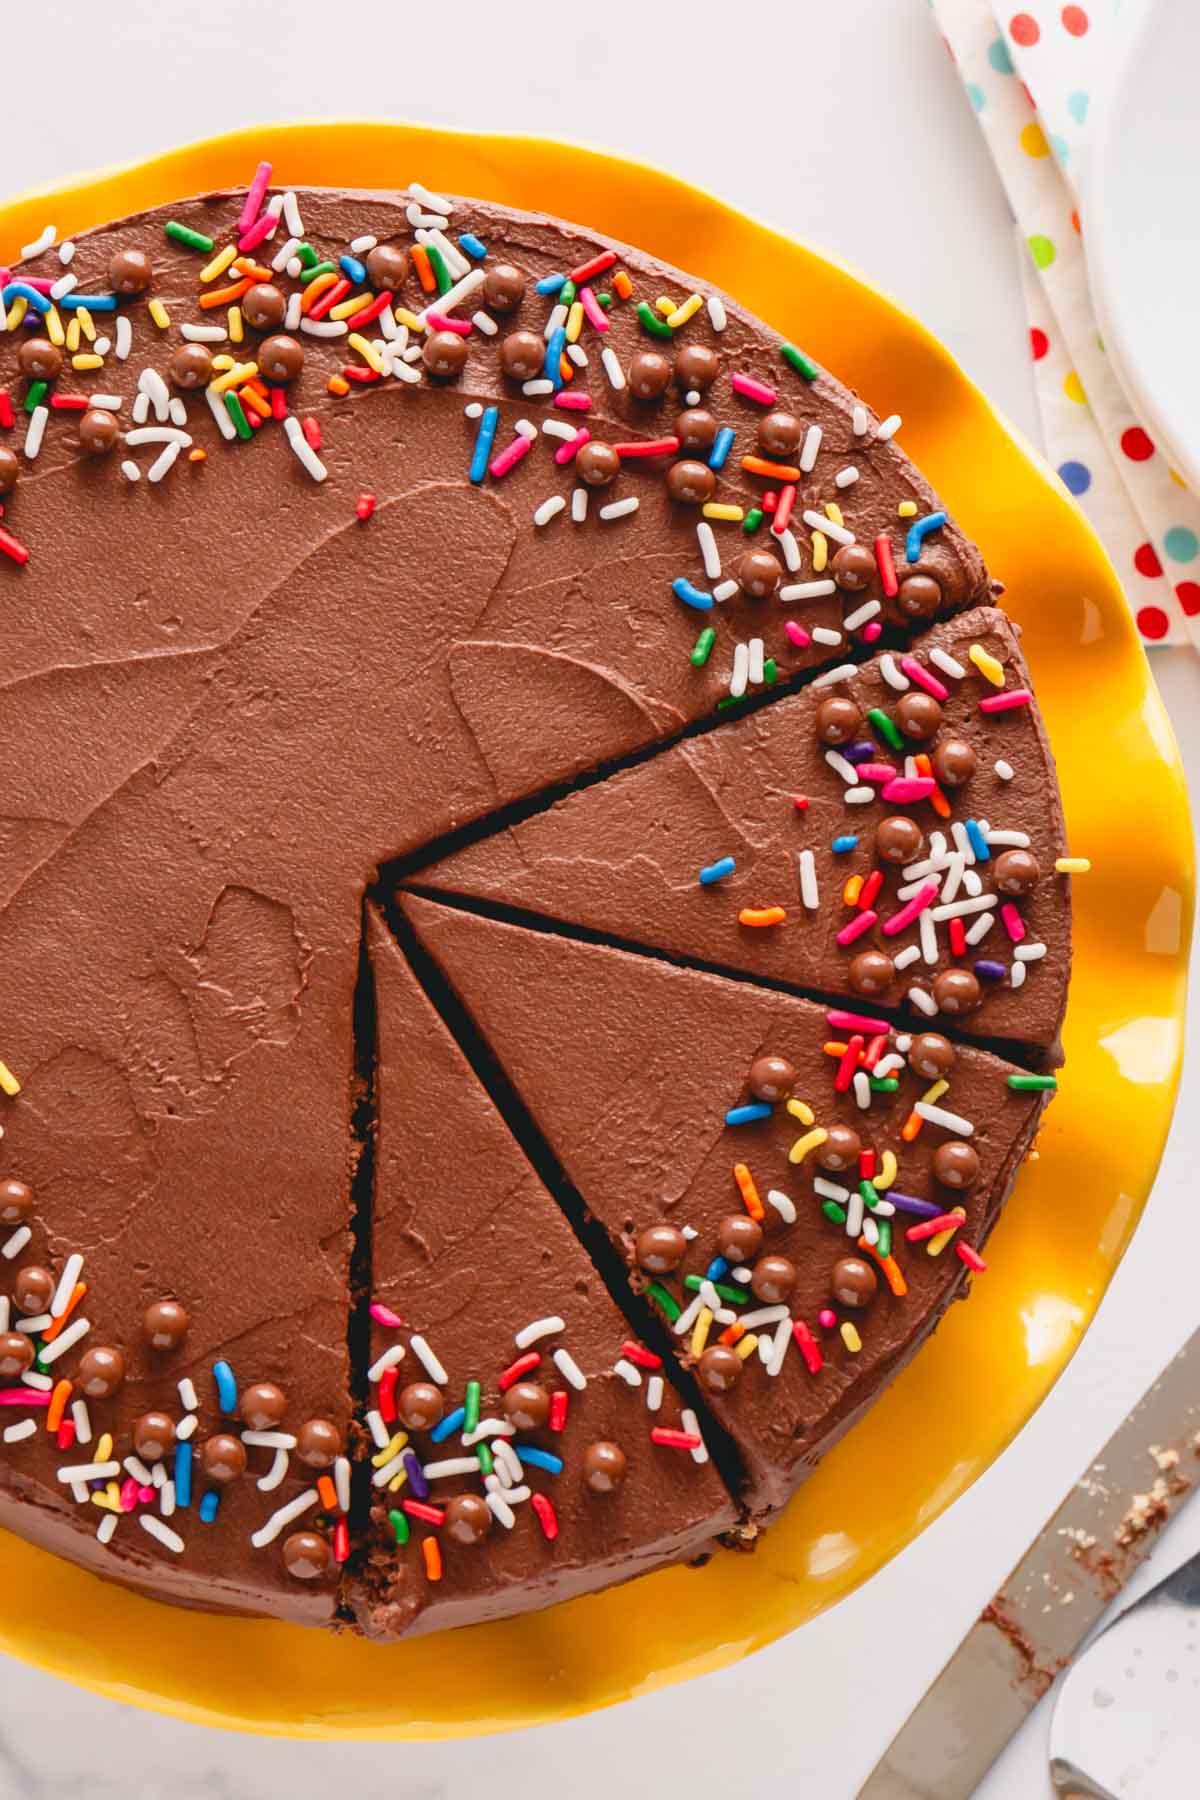 Overhead image of a chocolate frosted cake topped with sprinkles with three pieces sliced.